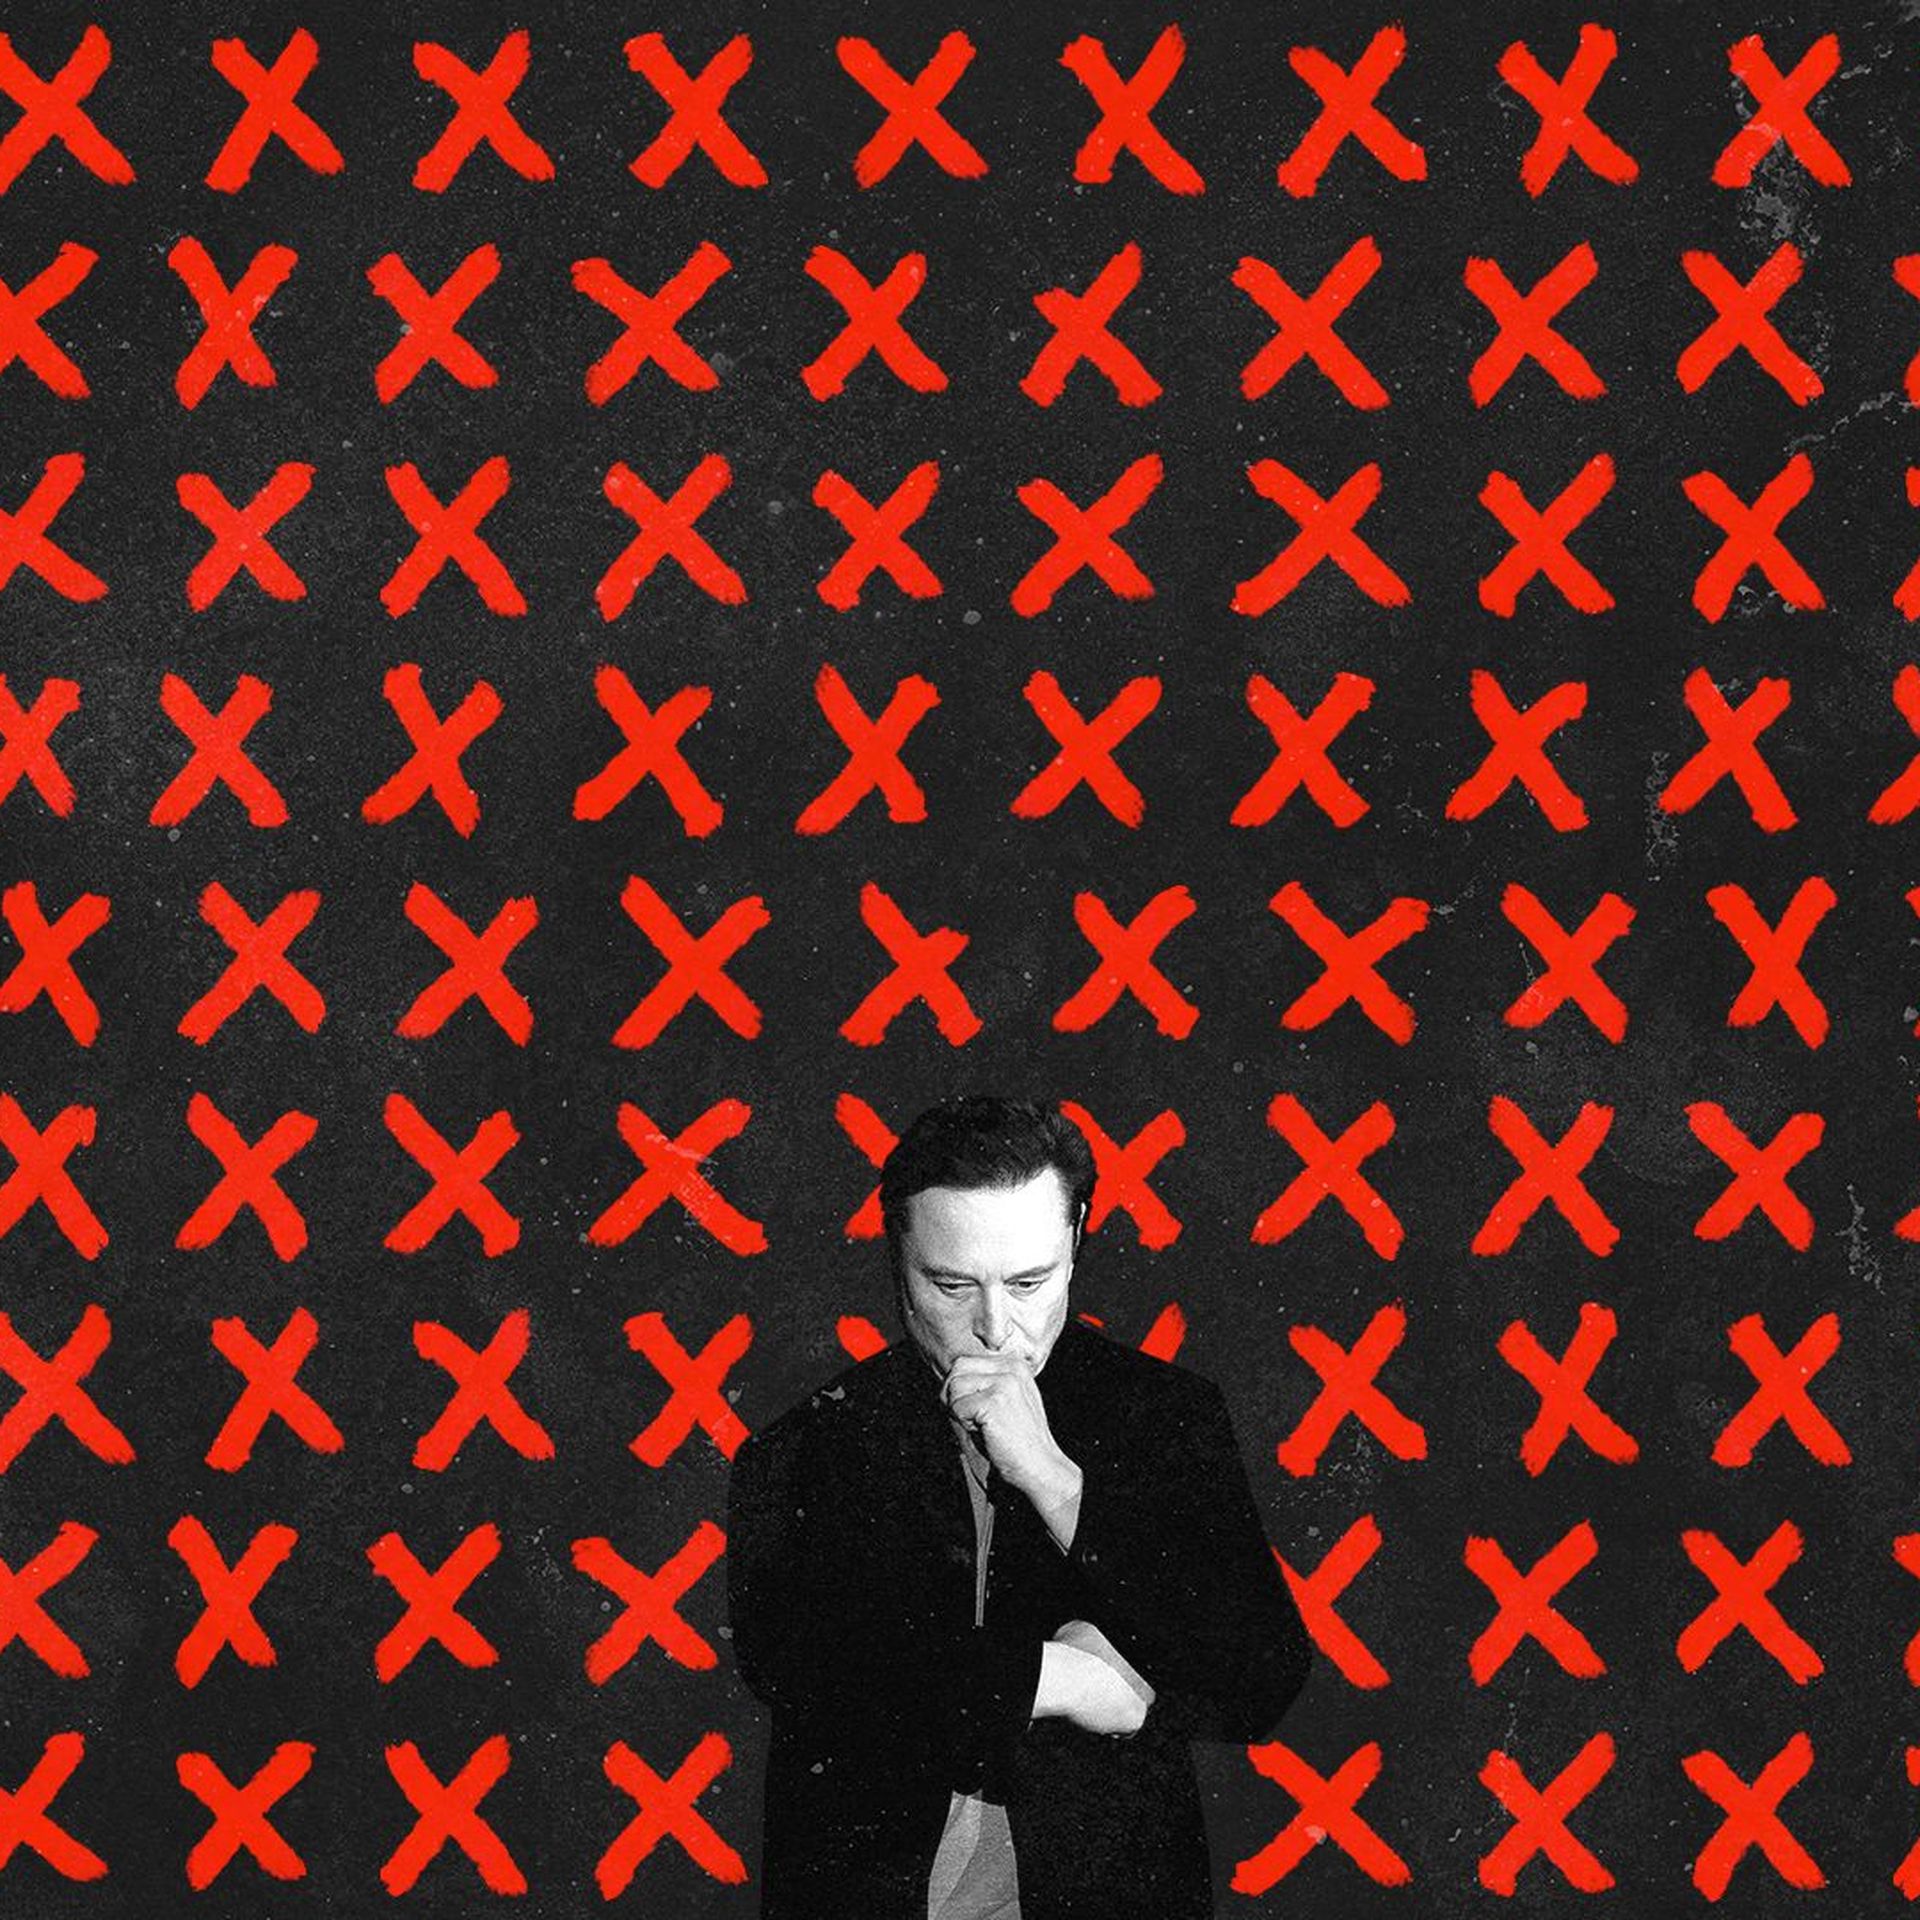 Photo illustration of Elon Musk looking worried and surrounded by bright red X's. 